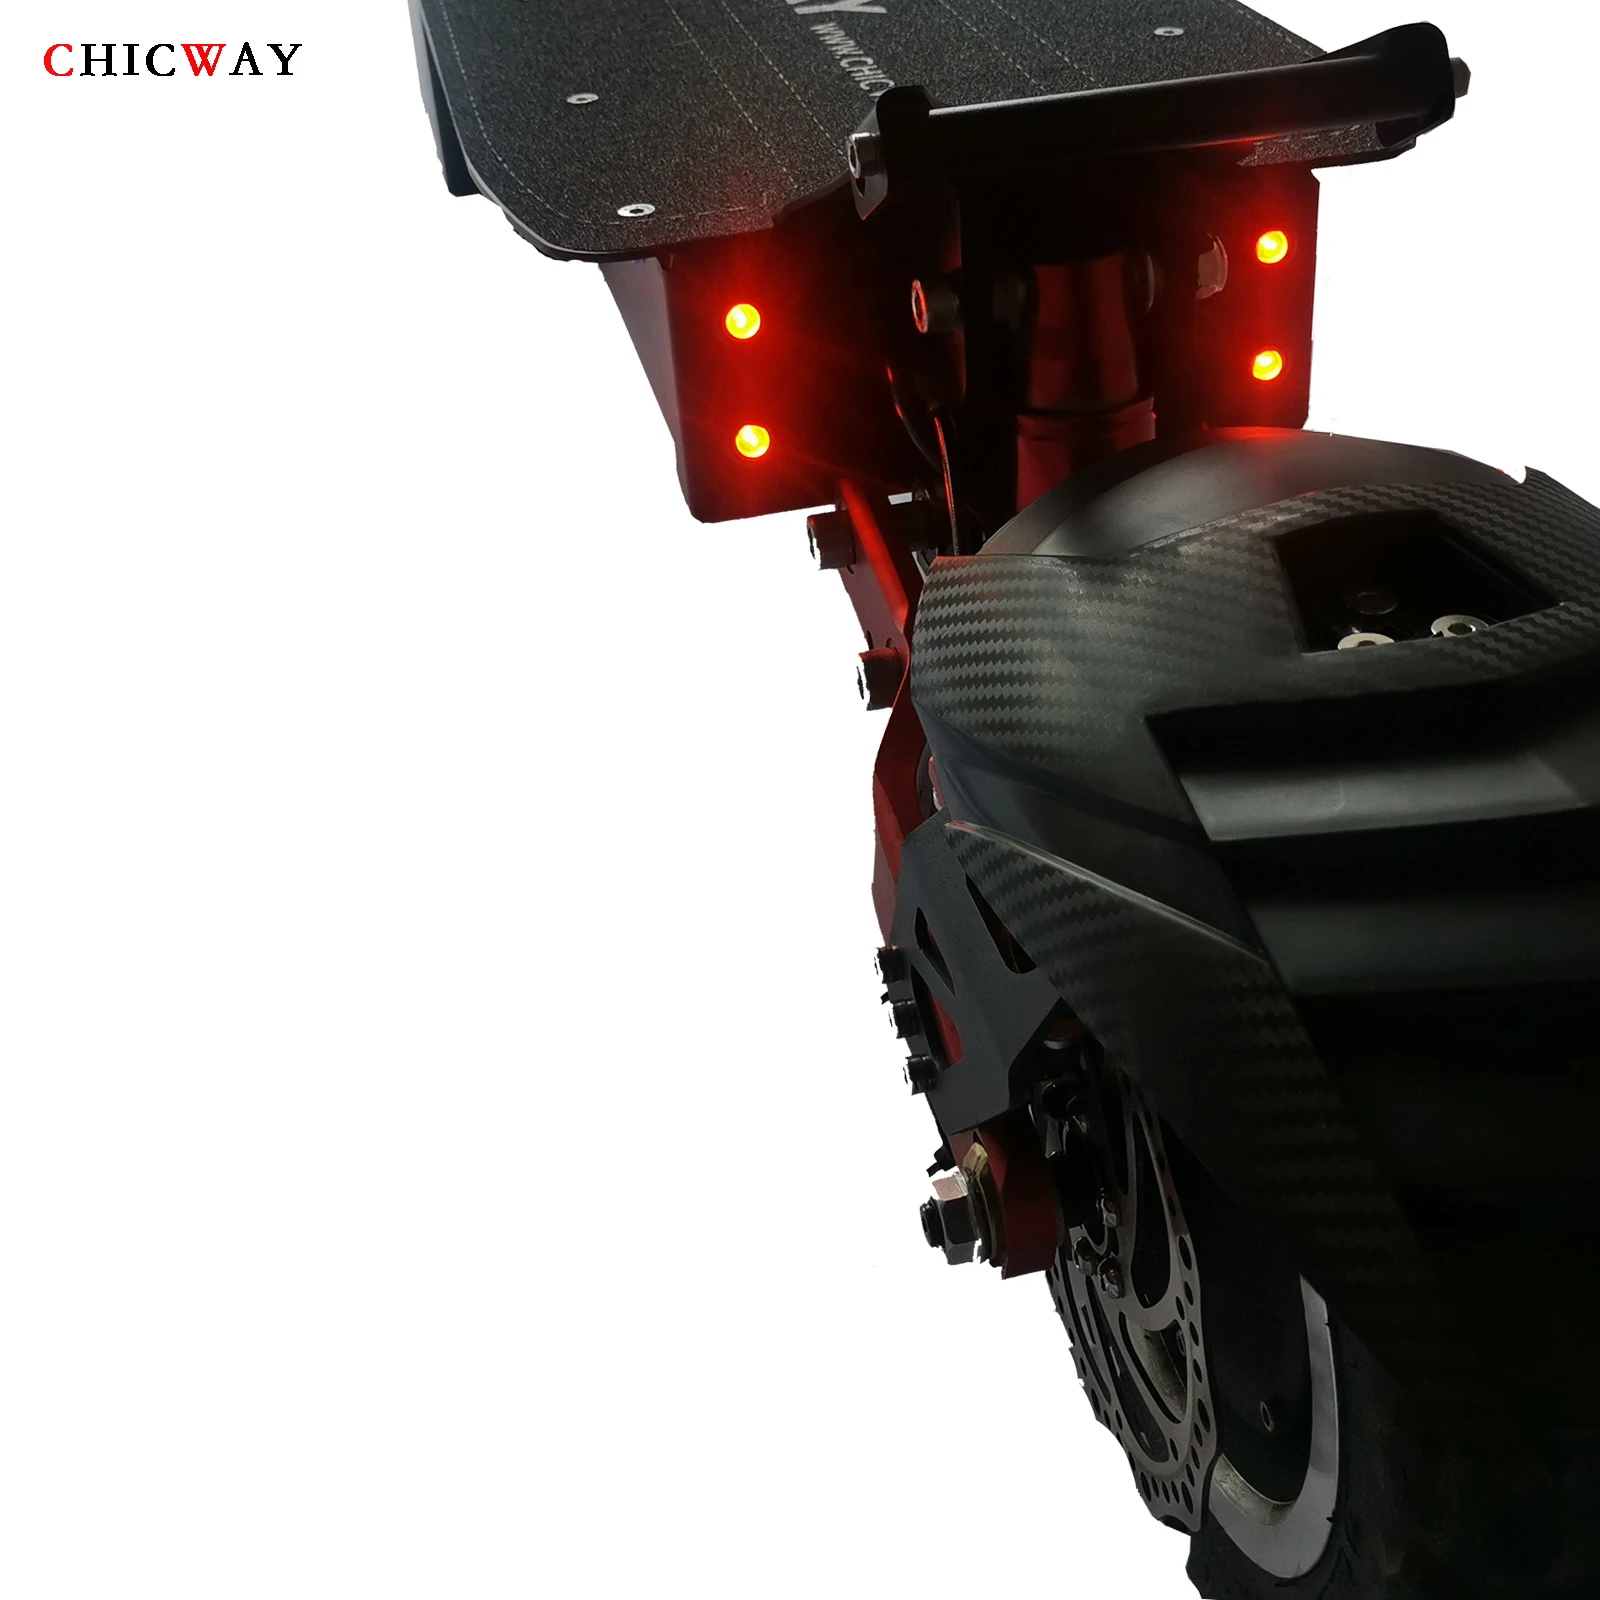 Sale 2019 hottest CHICWAY Spiderman off-road electric scooter,Dual drive 3200W,Independent suspension,hydraulic shock absorber,80km/h 4